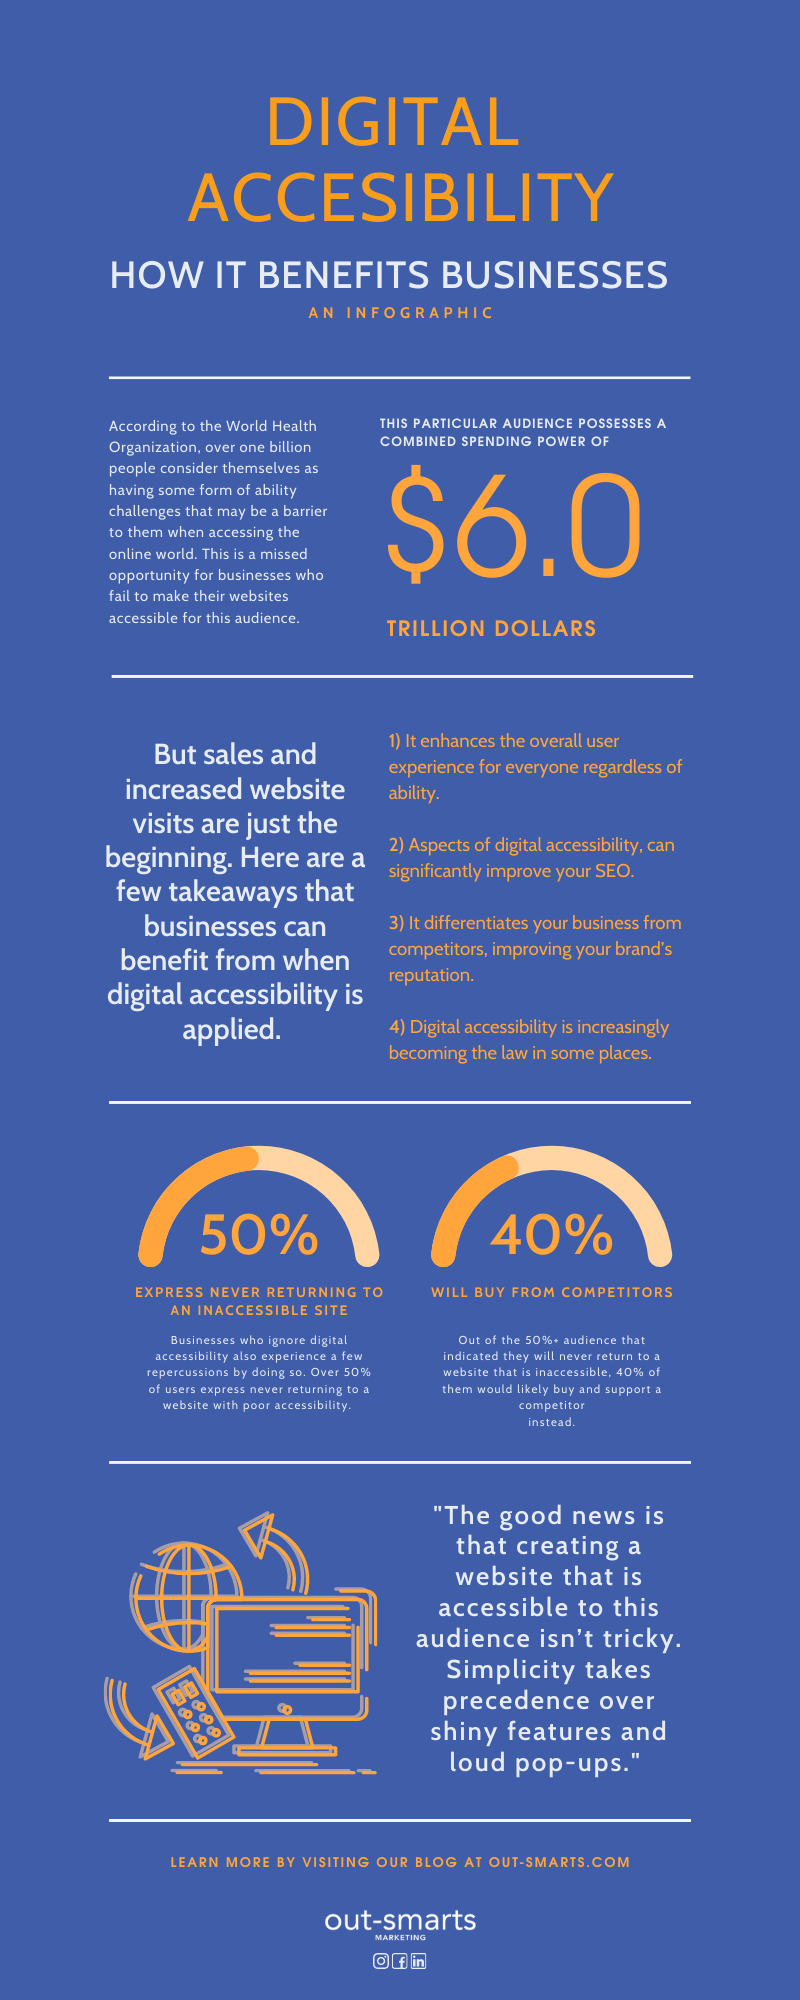 digital accessibility infographic - described in full in the text below